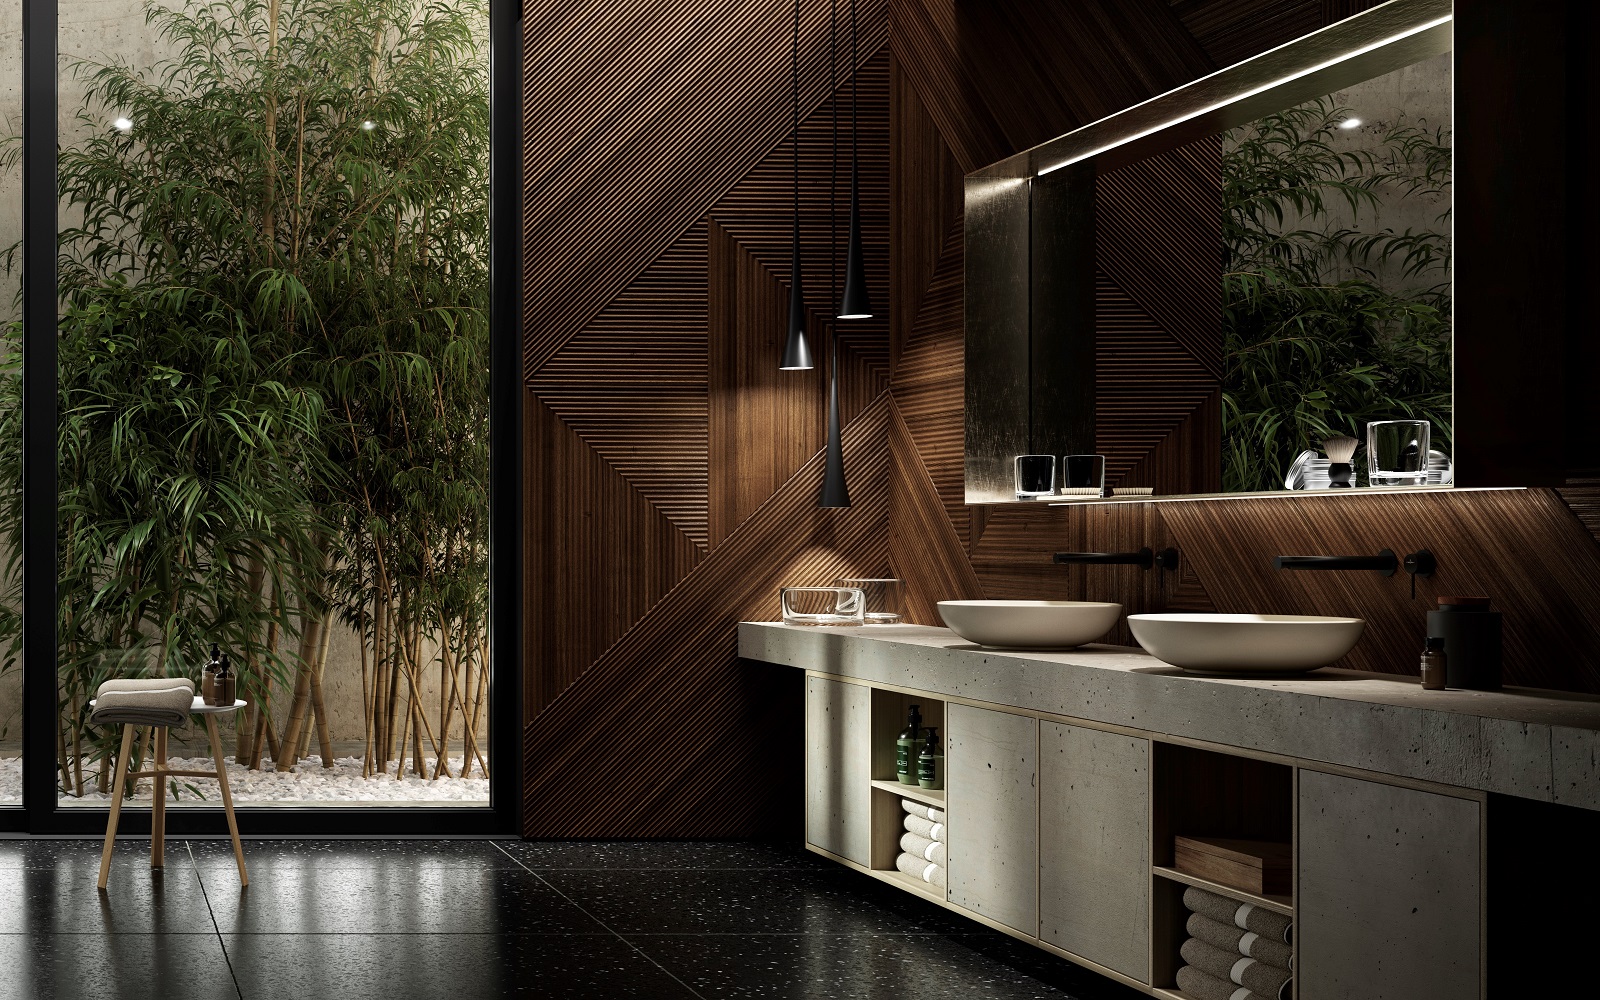 wood and glass in bathroom with double vanity unit from Villeroy & Boch